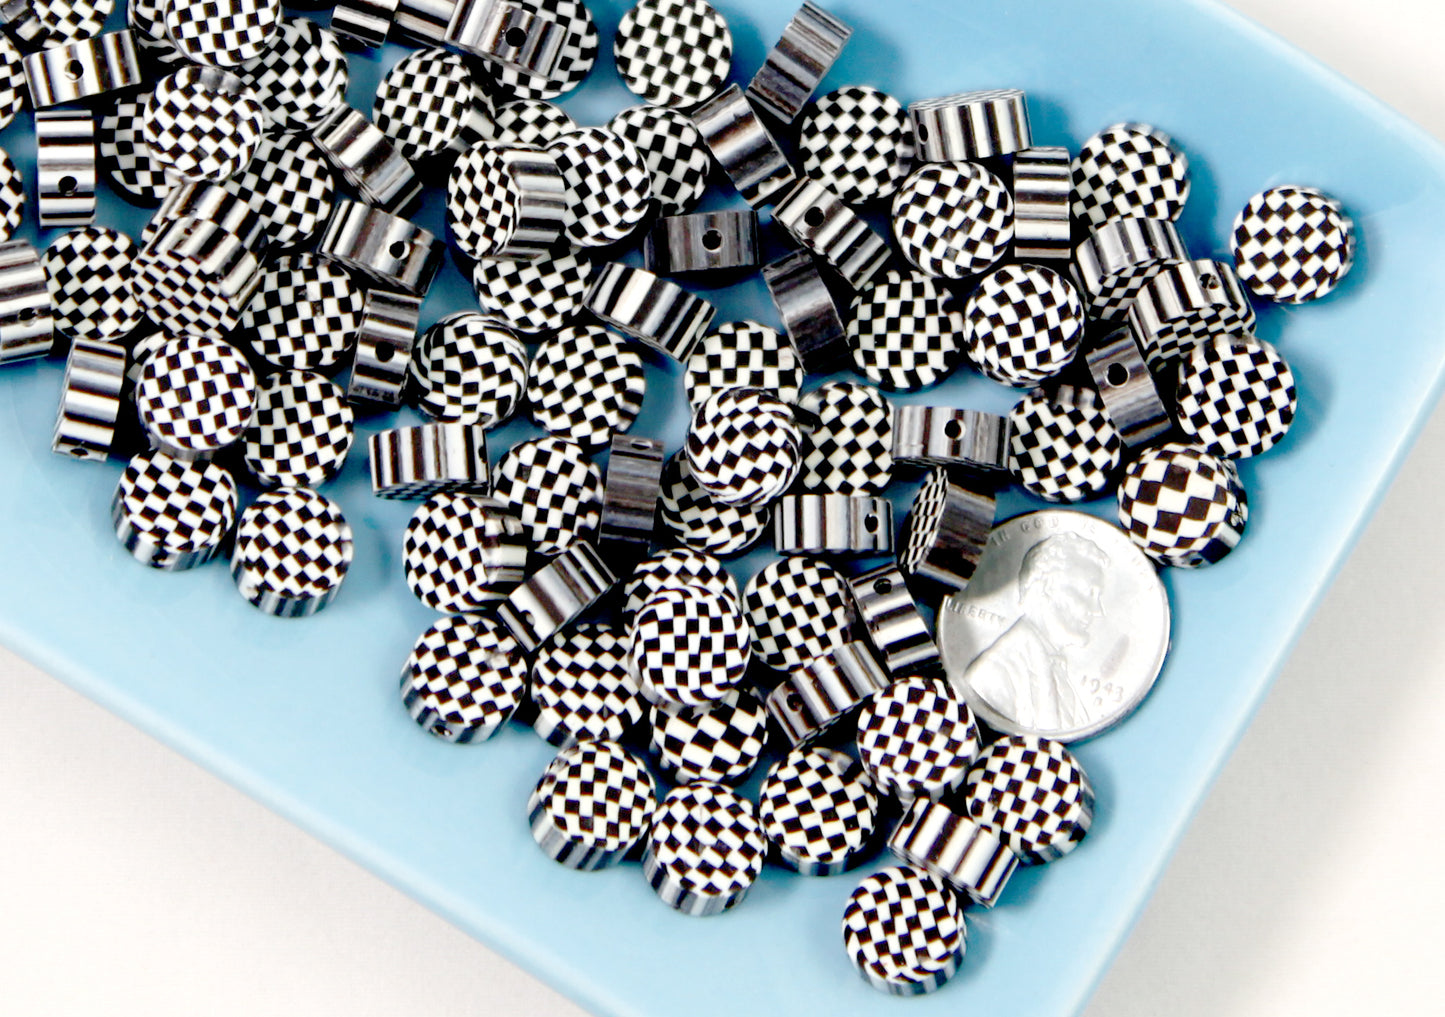 Checker Beads - 10mm Checkerboard Black and White Fimo or Polymer Clay Beads - 50 pc set